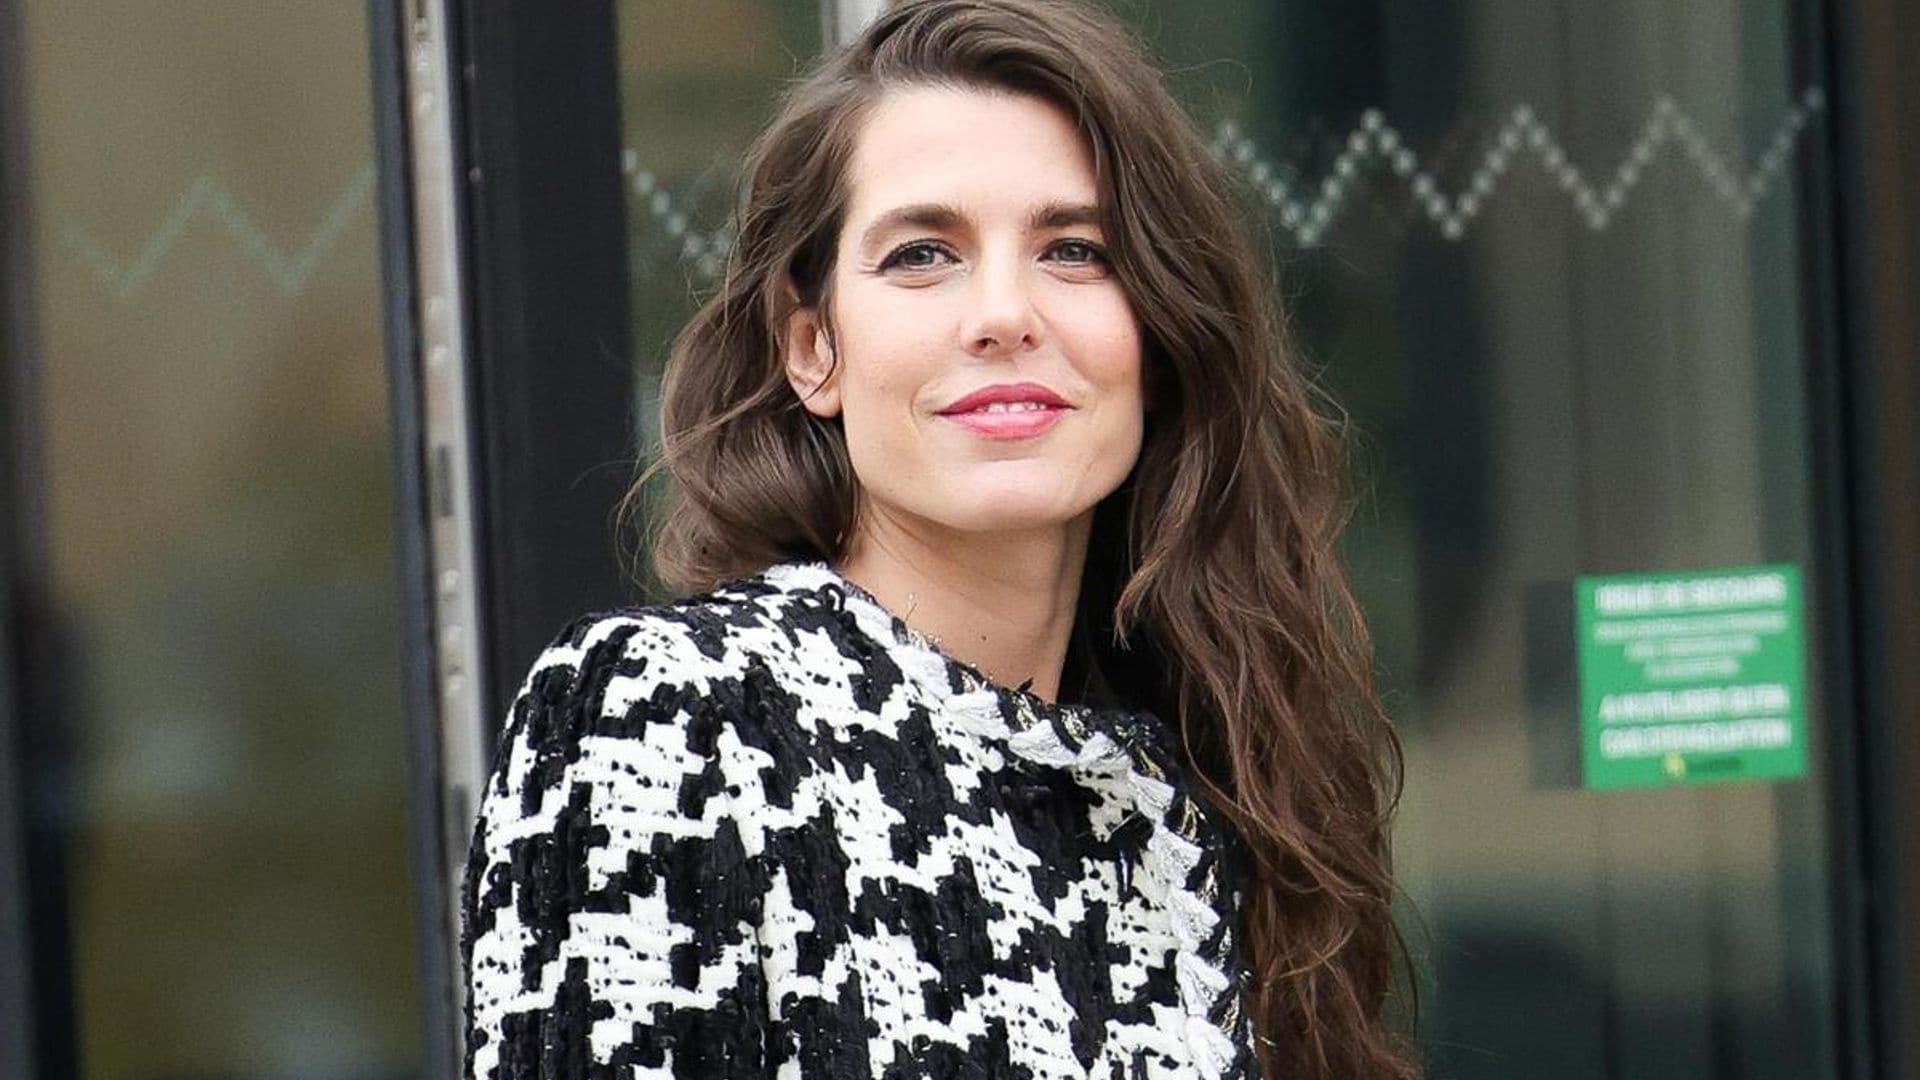 Did Charlotte Casiraghi’s son Raphaël become an uncle?